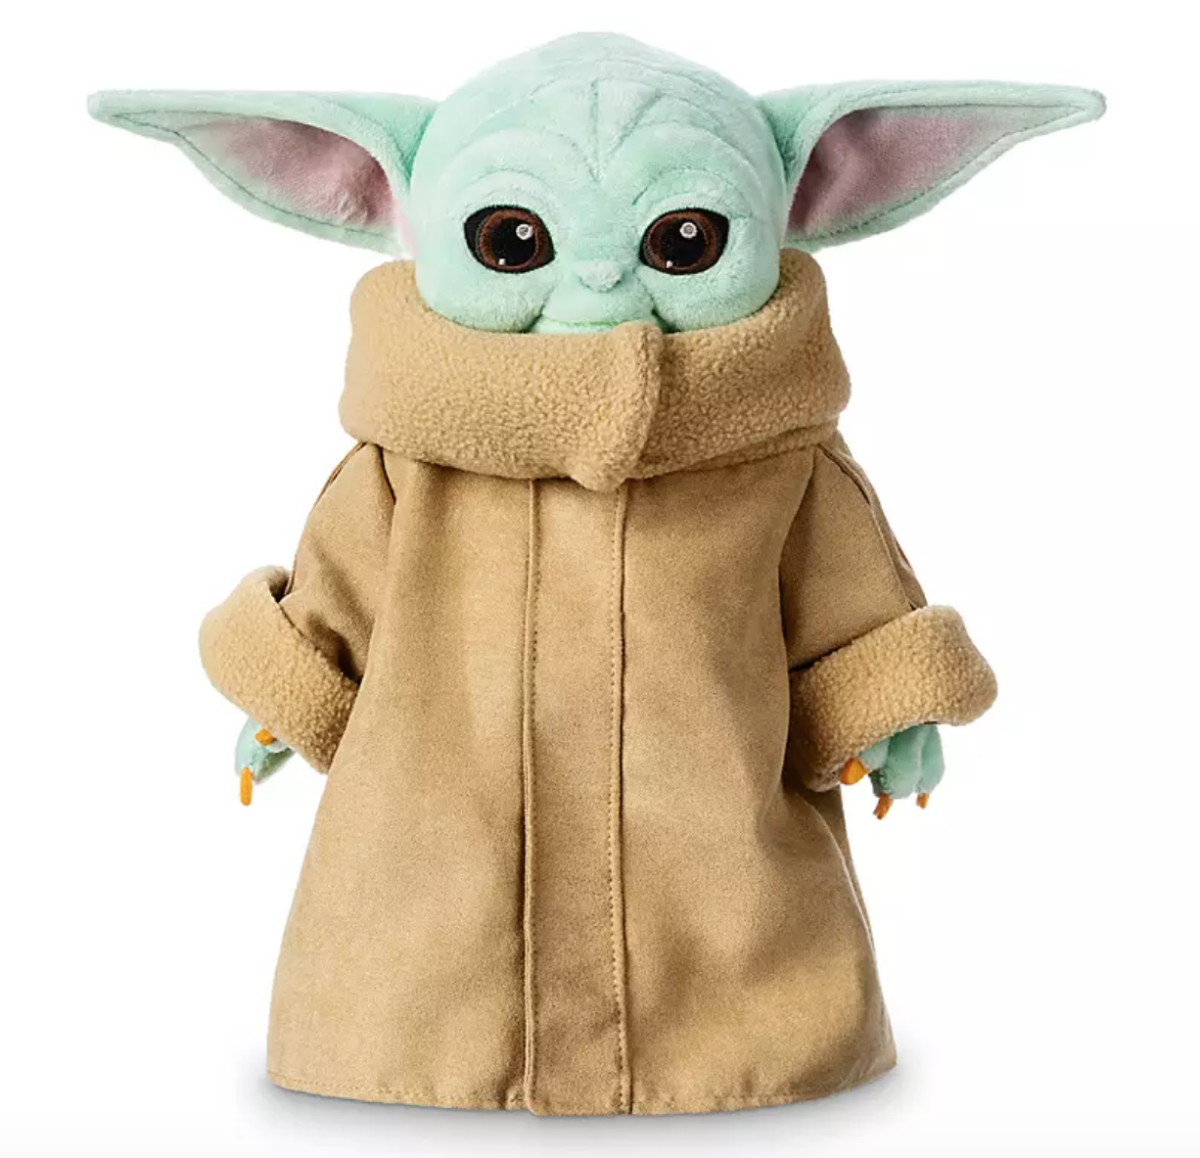 Baby Yoda Hasbro Animatronic Merch From Star Wars Is Here and Adorable